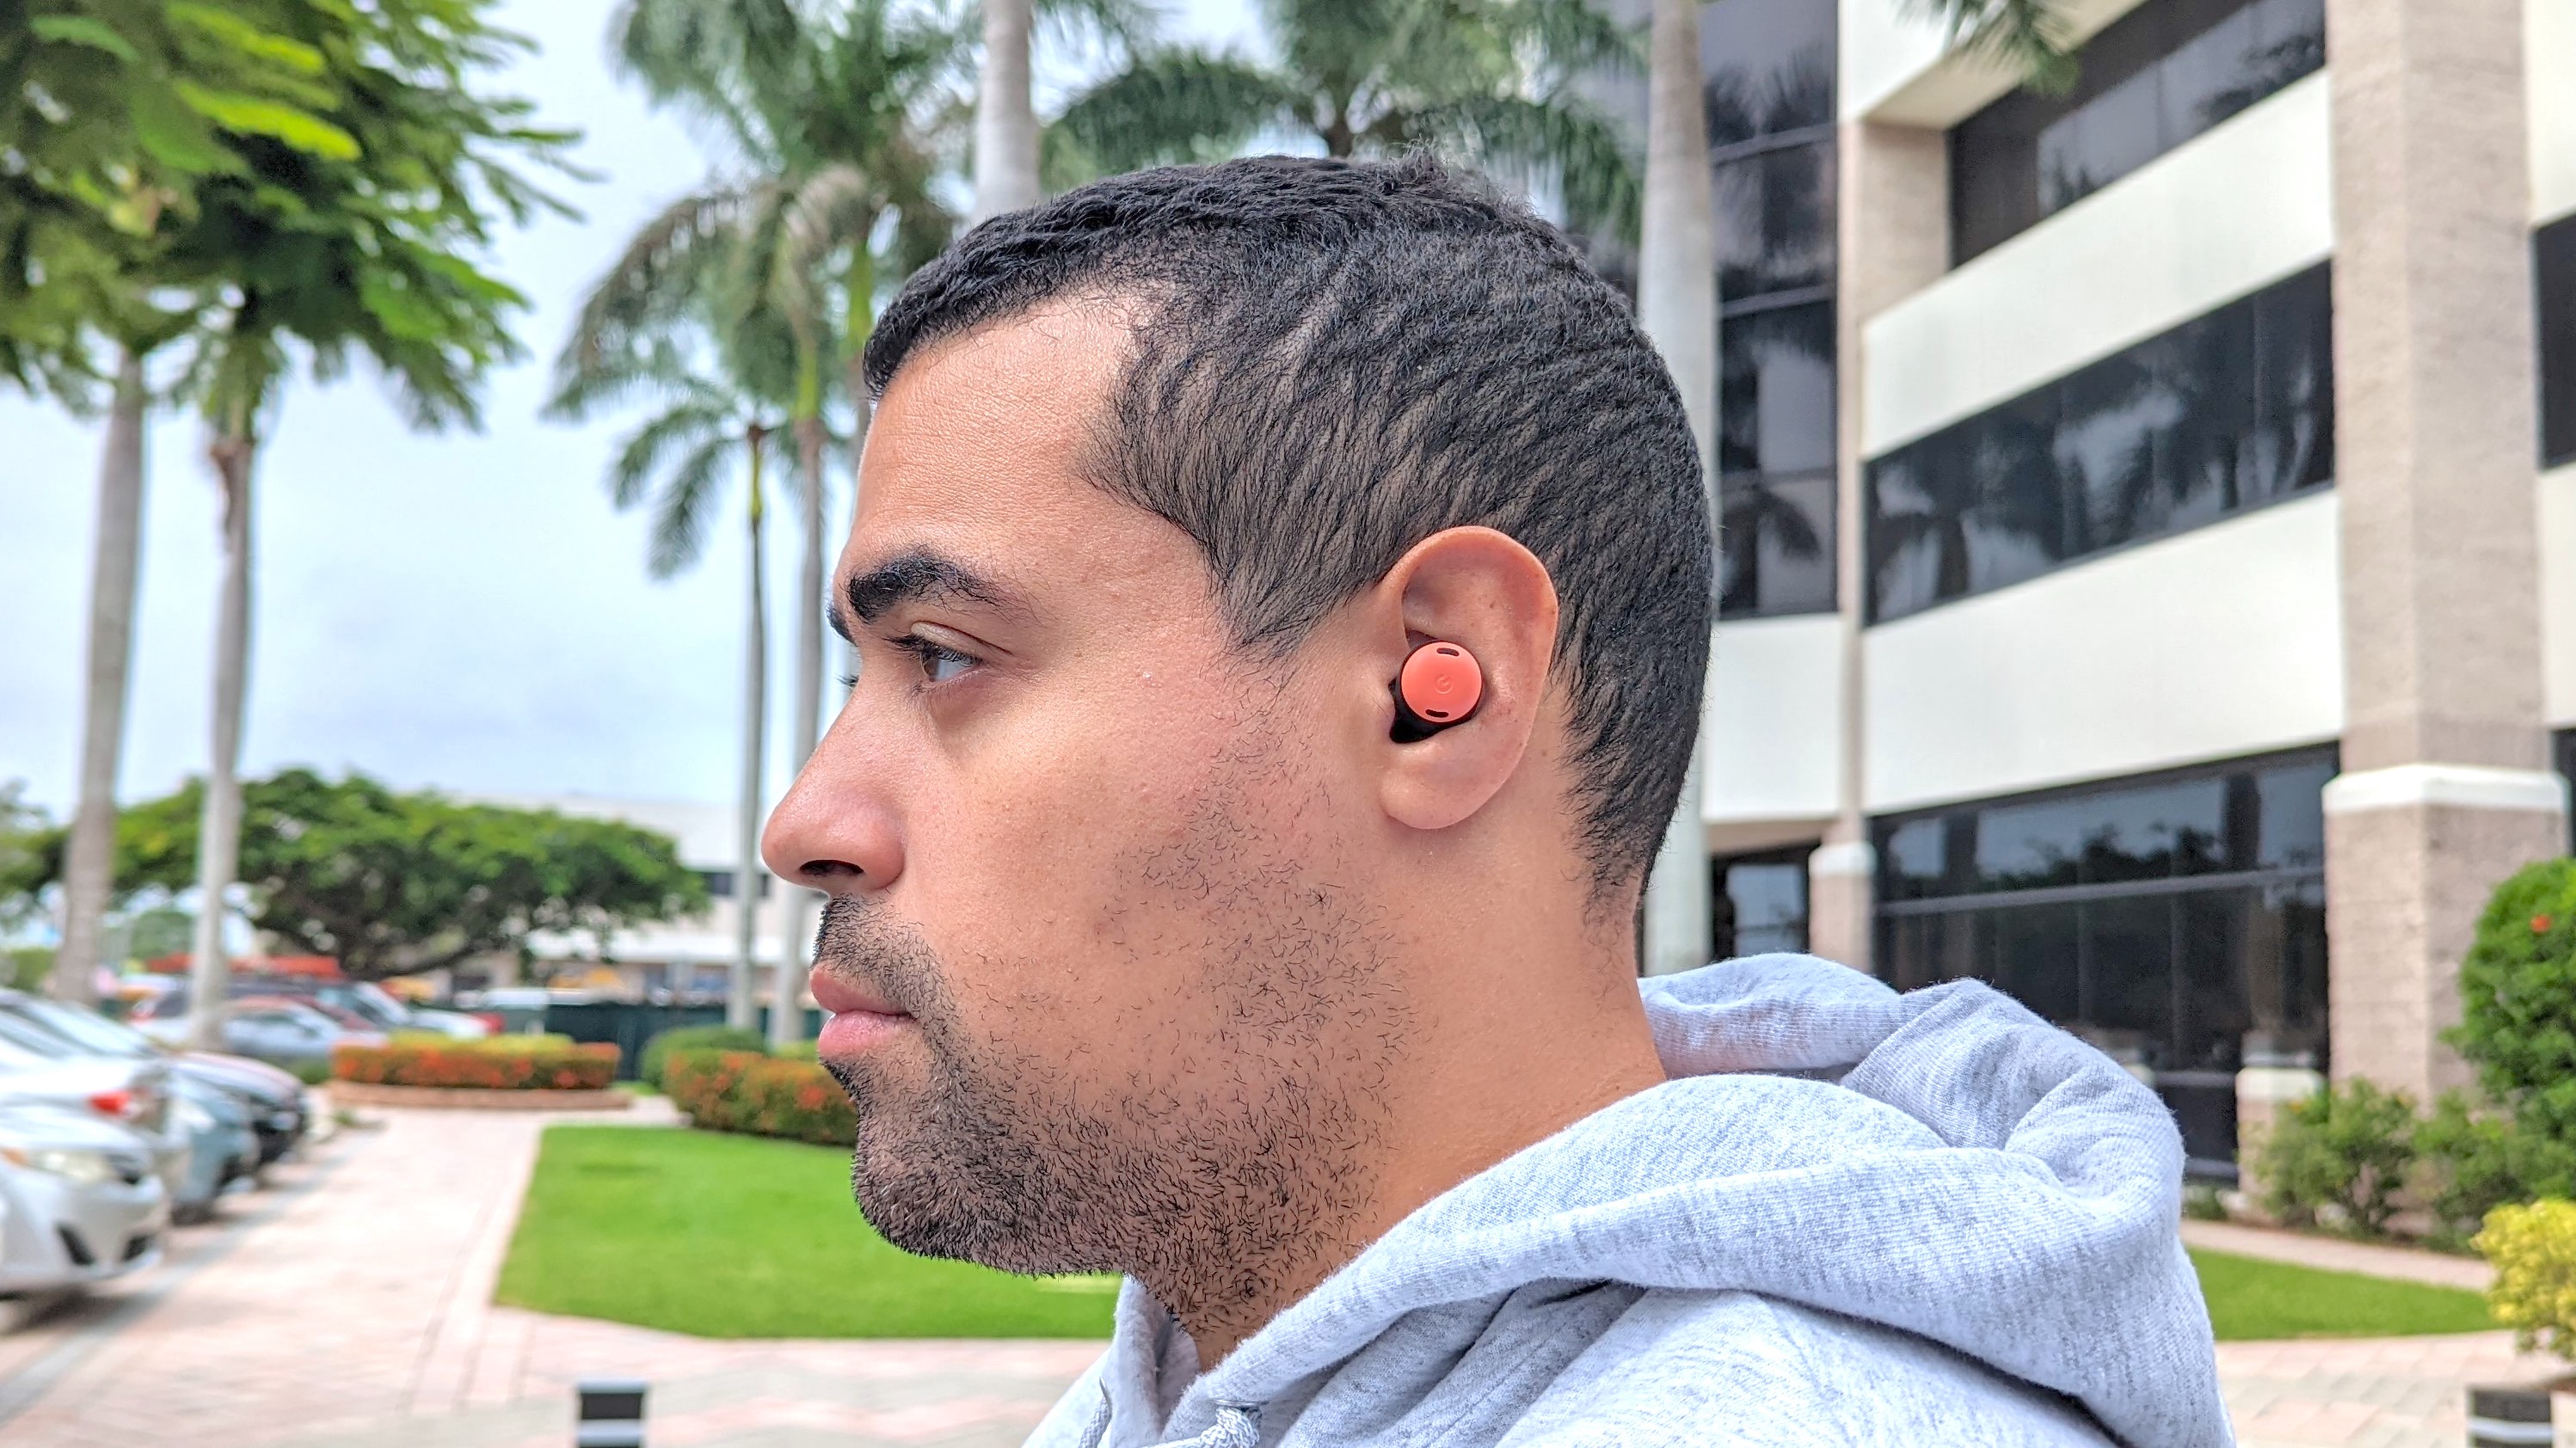 Our reviewer testing comfort and fit on the Google Pixel Buds Pro